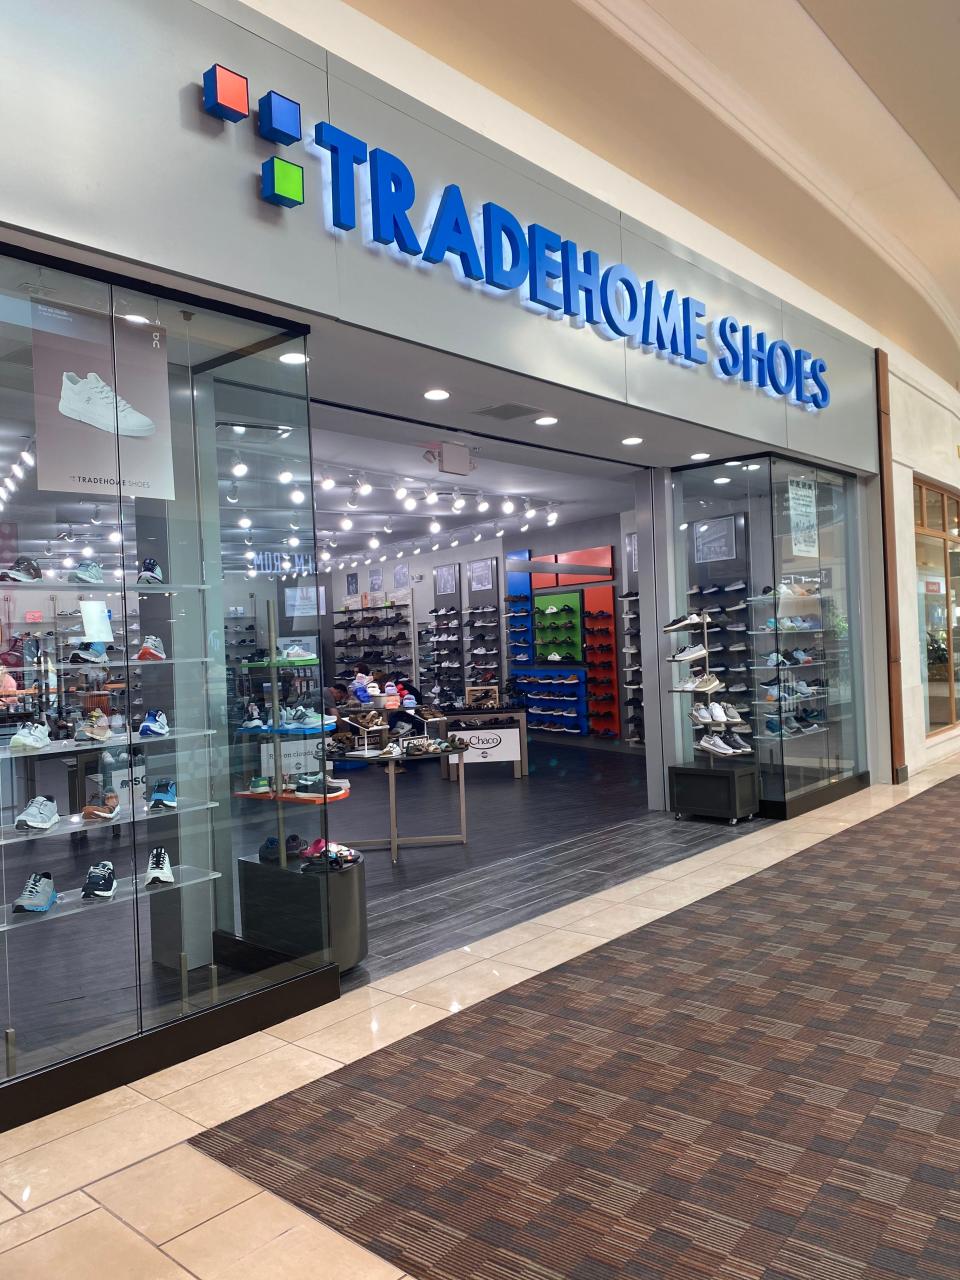 Tradehome Shoes opened at Polaris on April 29.